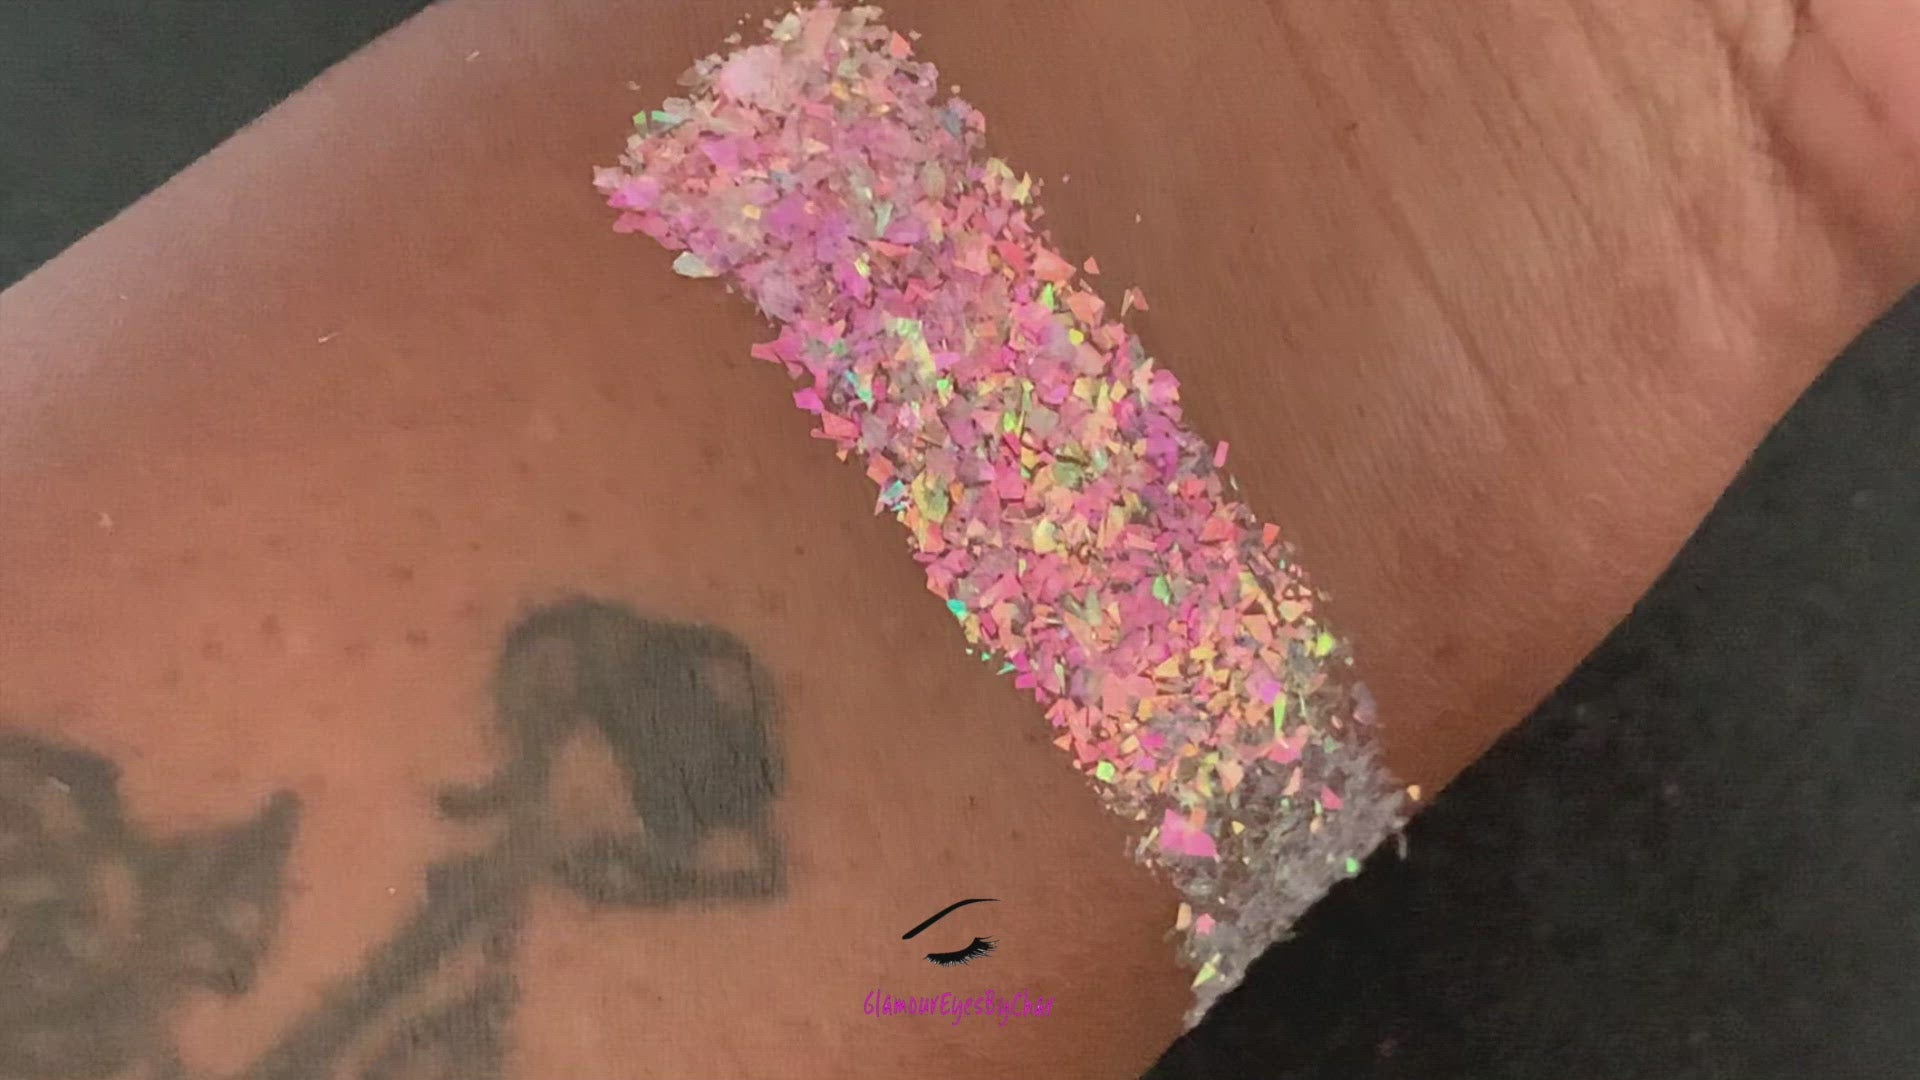 This glitter is called Pink Moscato and is part of the cellophane glitter flakes collection. It consists of white iridescent glitter shards with pink, green and golden reflects. Pink Moscato is perfect for body and nail art, glitter slime, resin art or DIY projects. Comes in 5g jars only.  